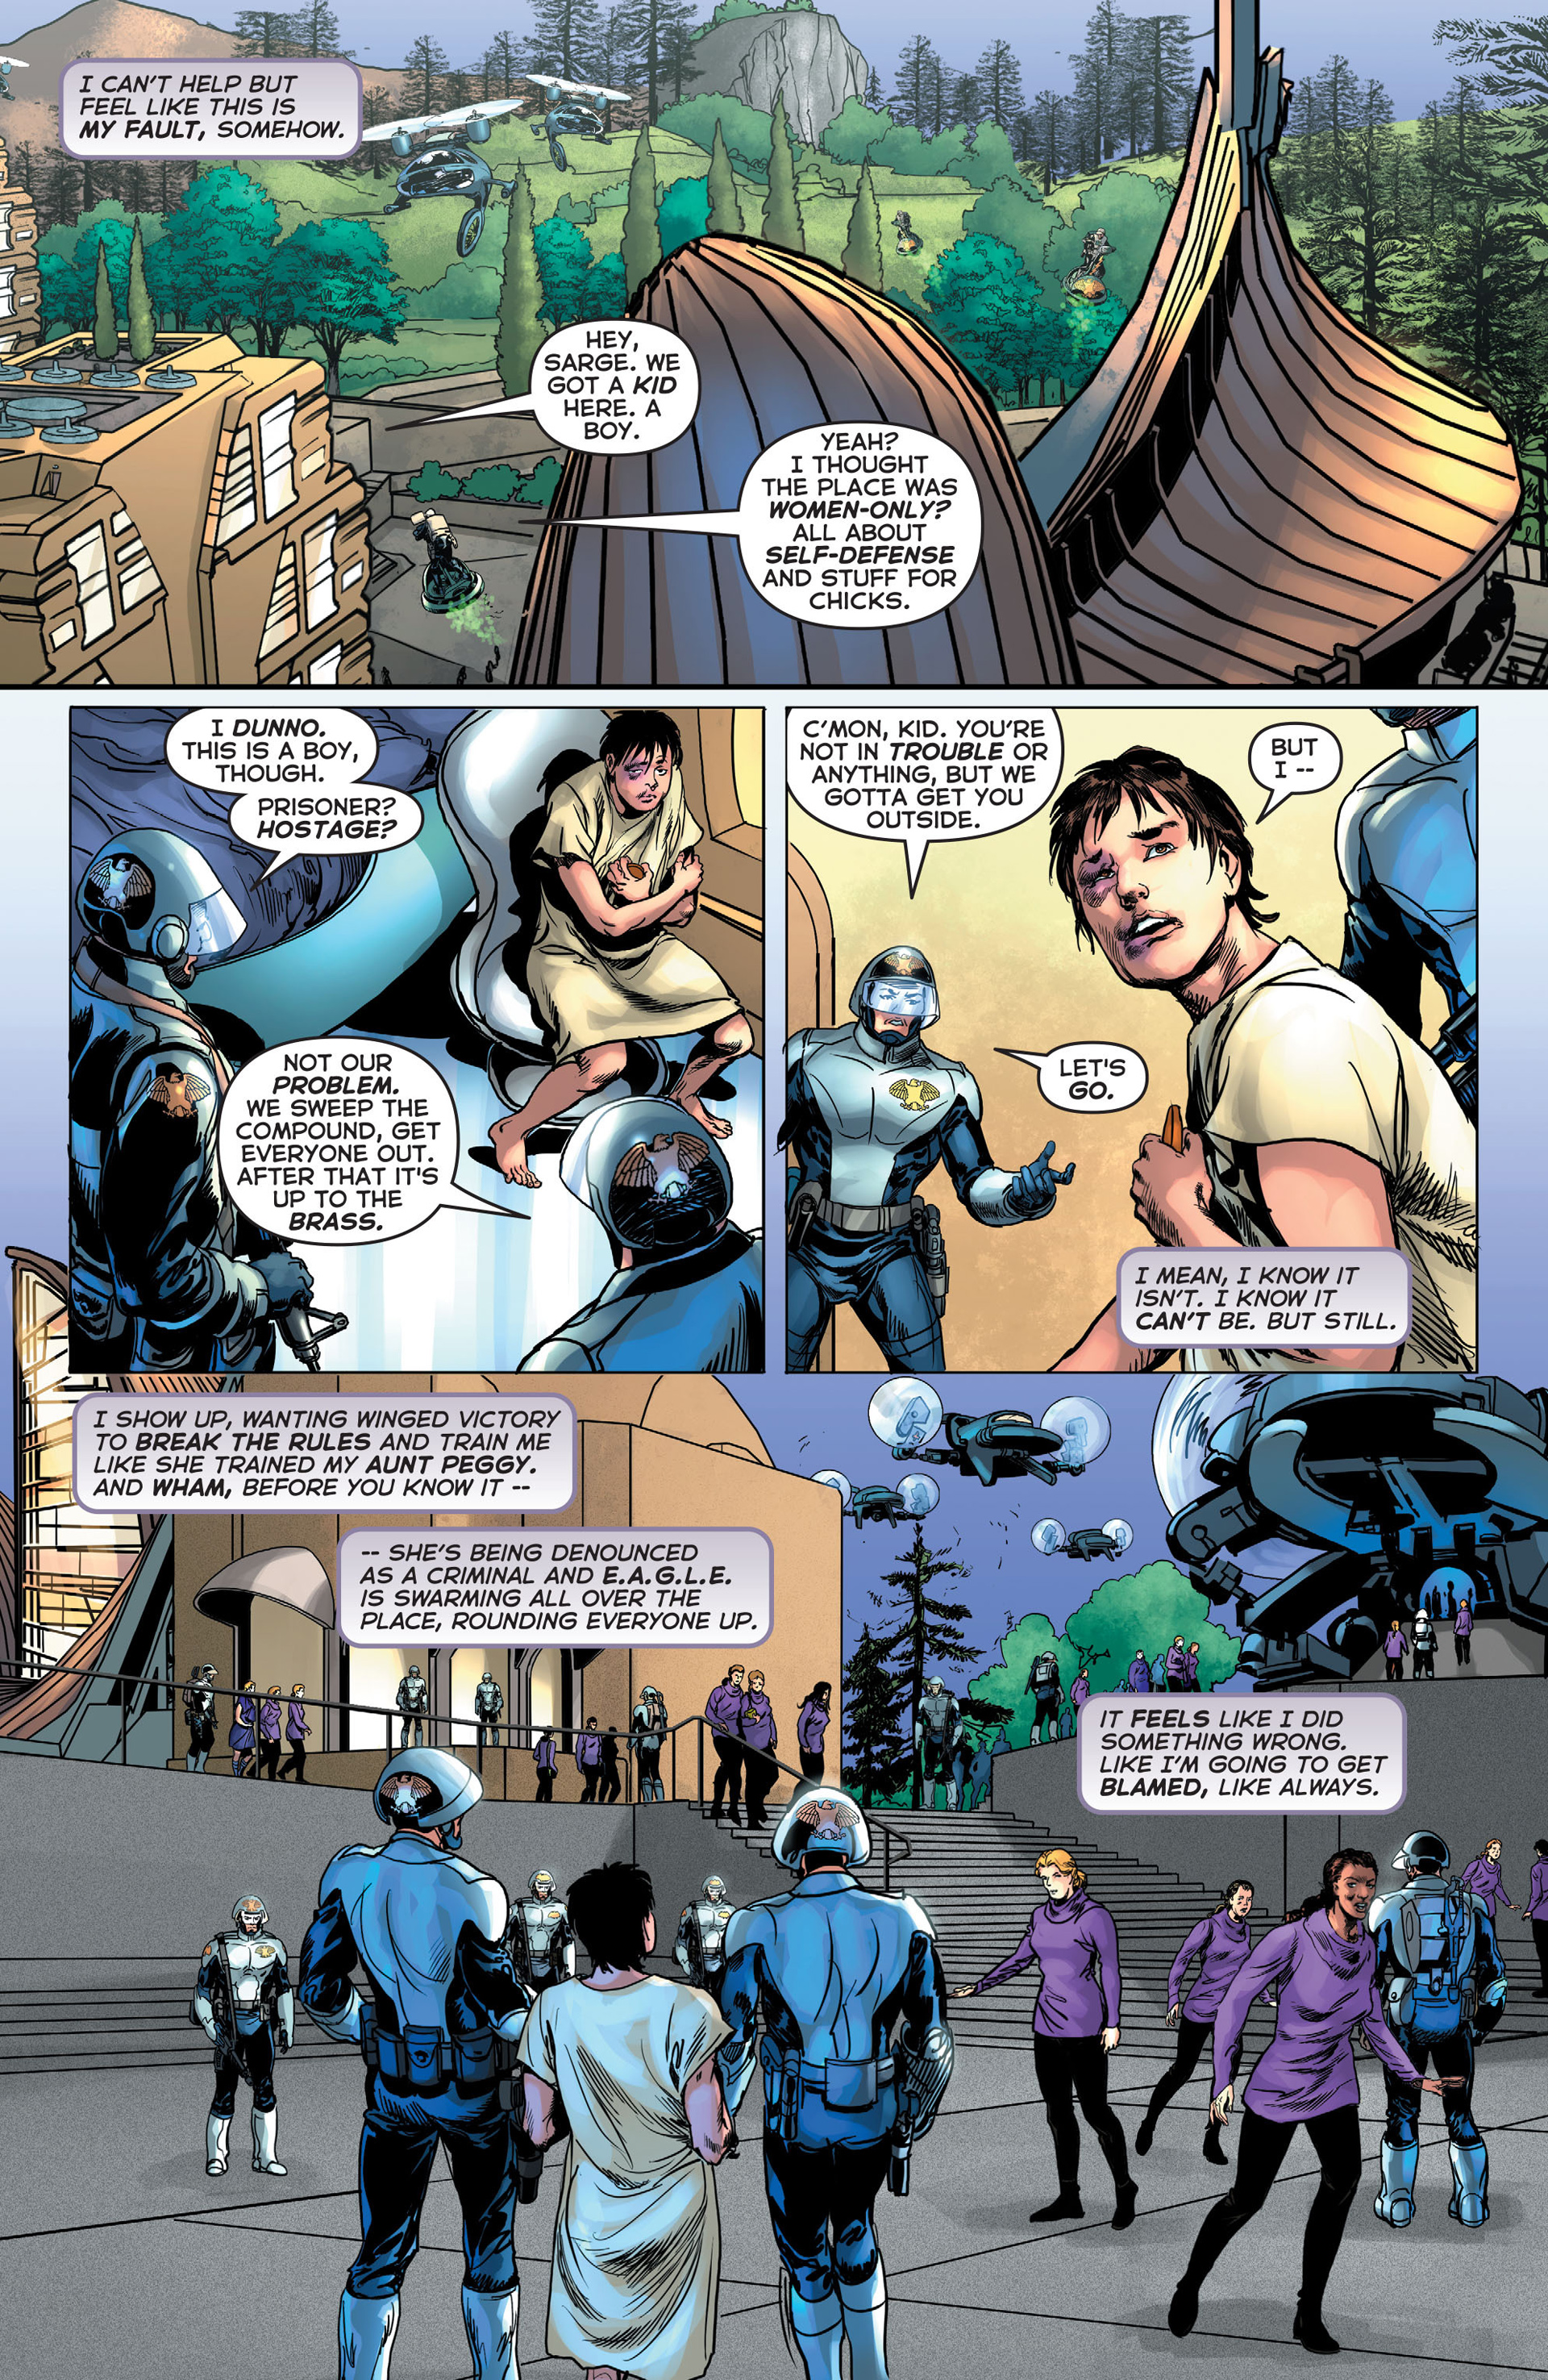 Astro City (2013-): Chapter 9 - Page 2